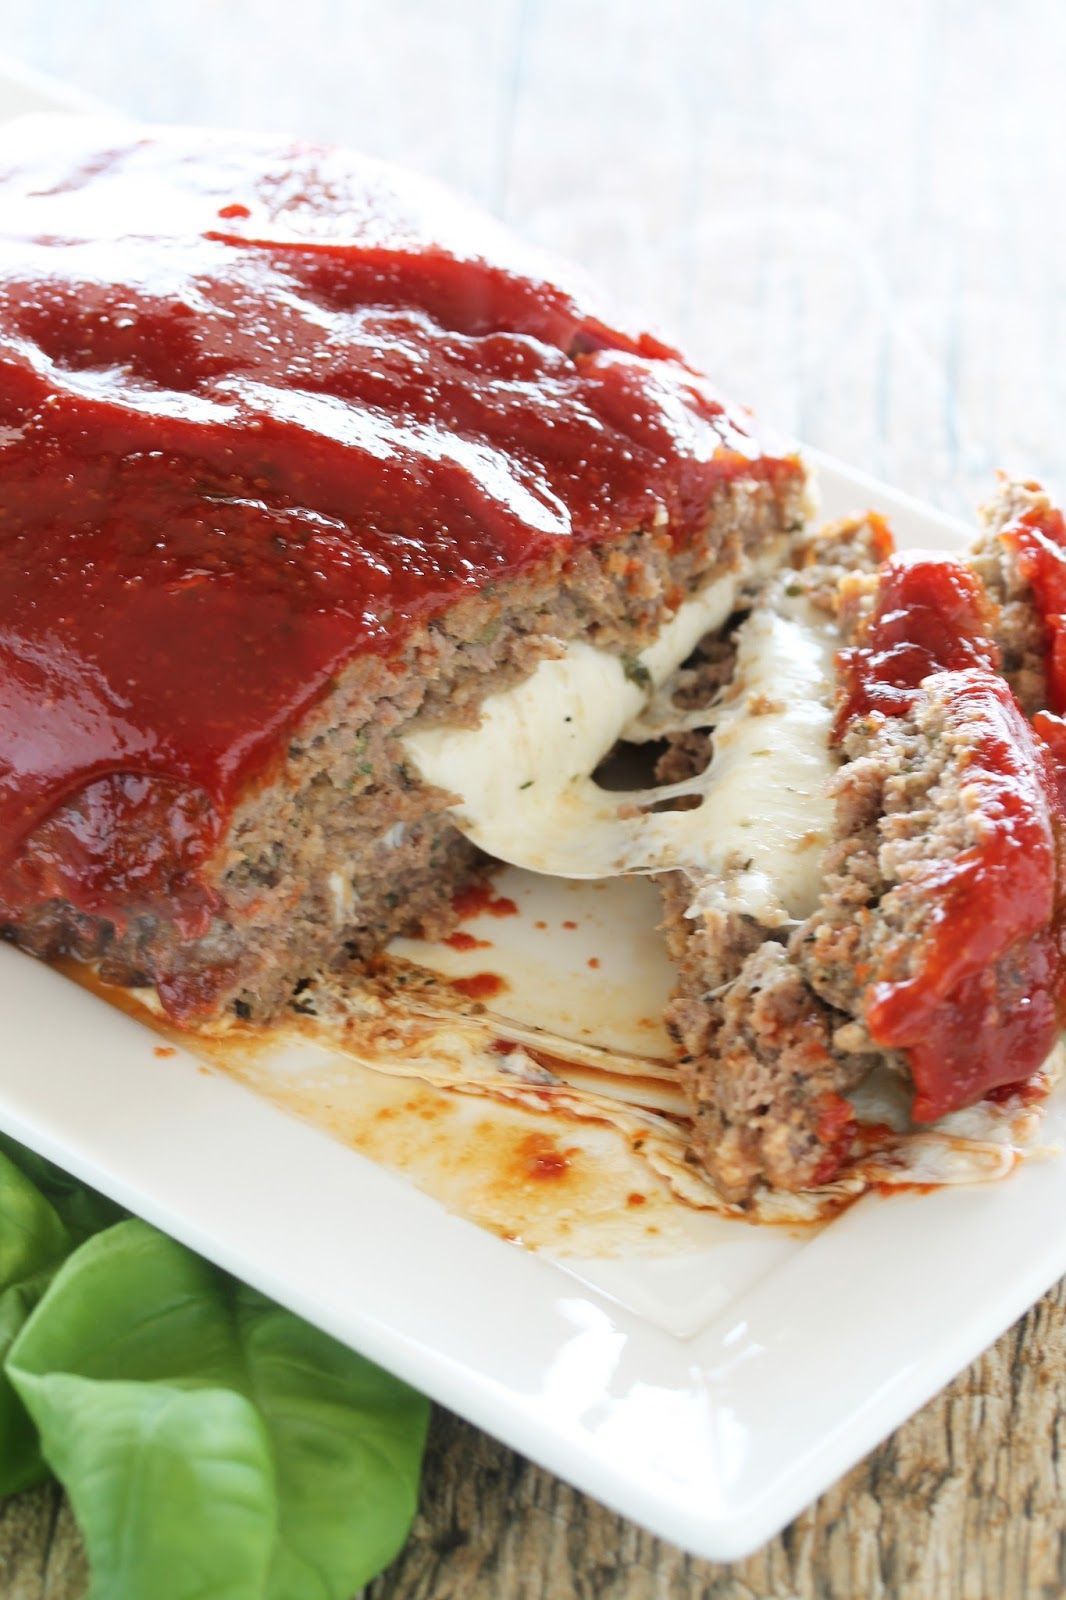 Flavorful ground beef stuffed with ooey gooey mozzarella cheese.